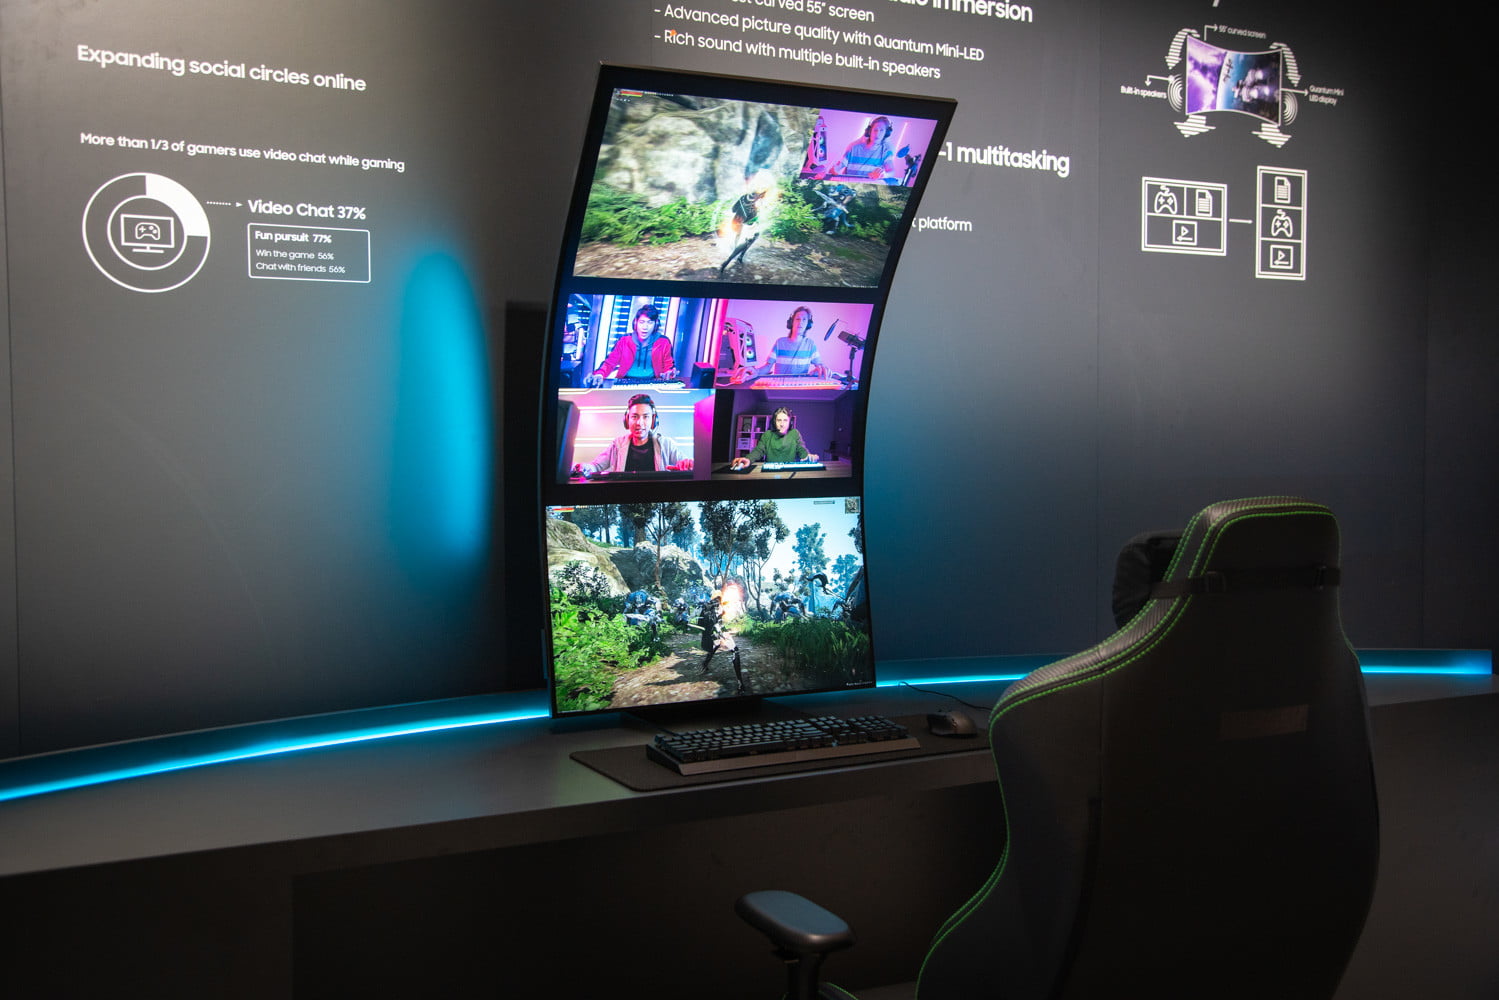 TCL shows off new 31-inch 4K 120Hz dome-shaped OLED gaming monitor